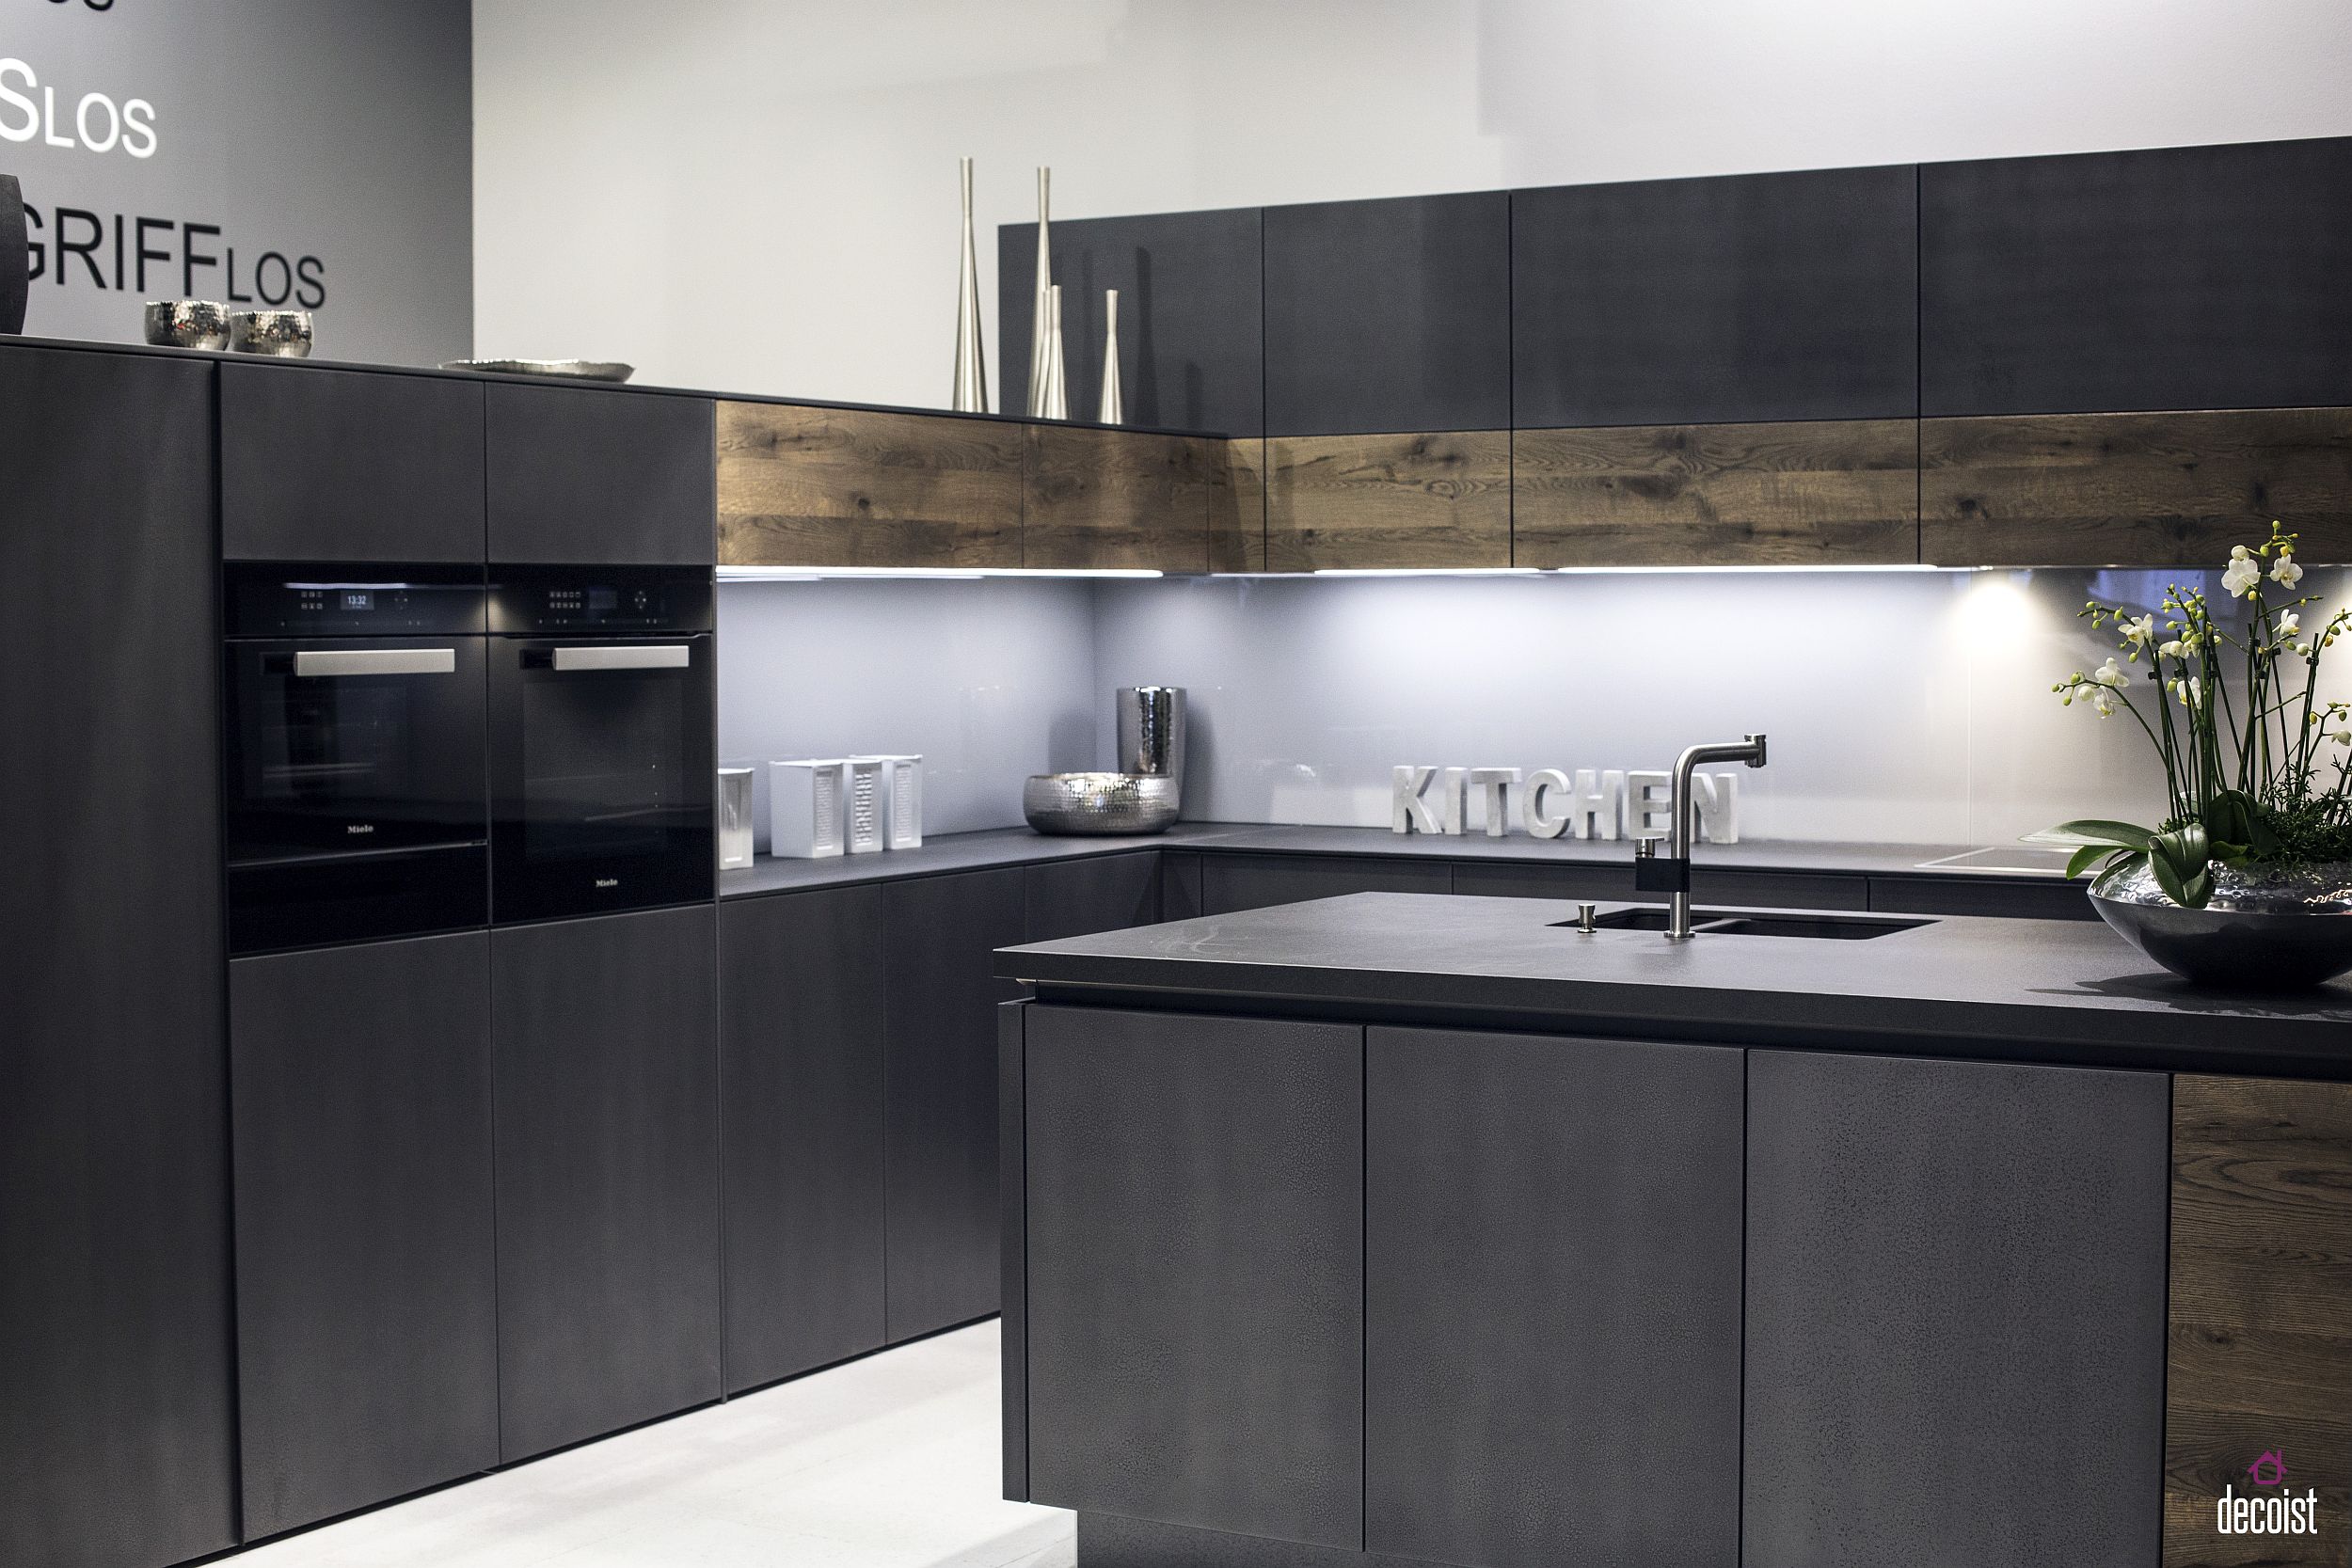 Create-a-balance-between-open-and-closed-dynamics-in-the-elegant-kitchen